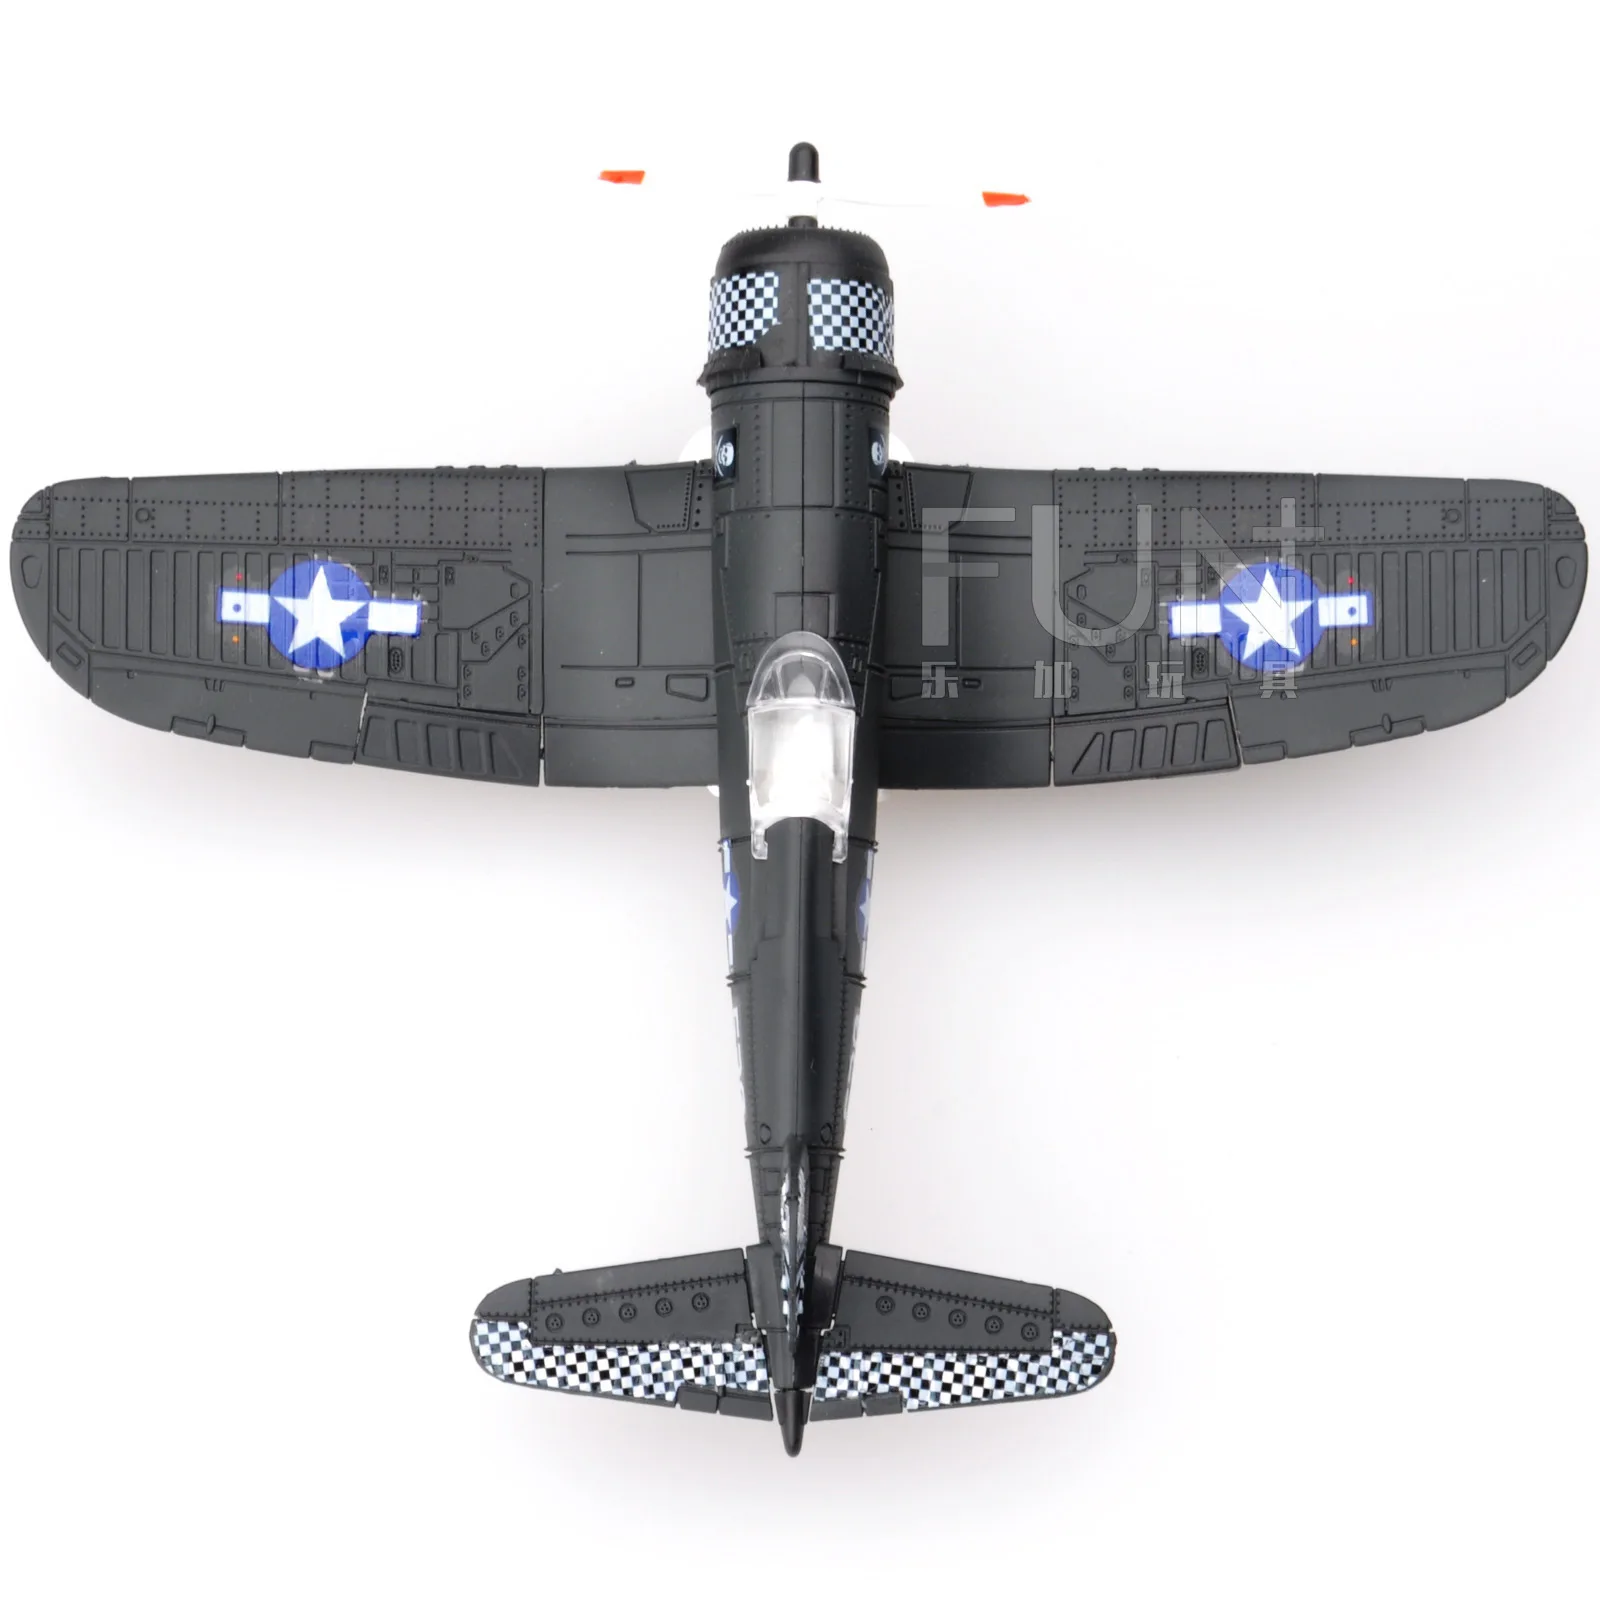 22cm 4D Diy Toys Fighter Assemble Blocks Building Model Airplane Military Model Arms WW2 Germany BF109 UK Hurricane Fighter diy house kits Model Building Toys